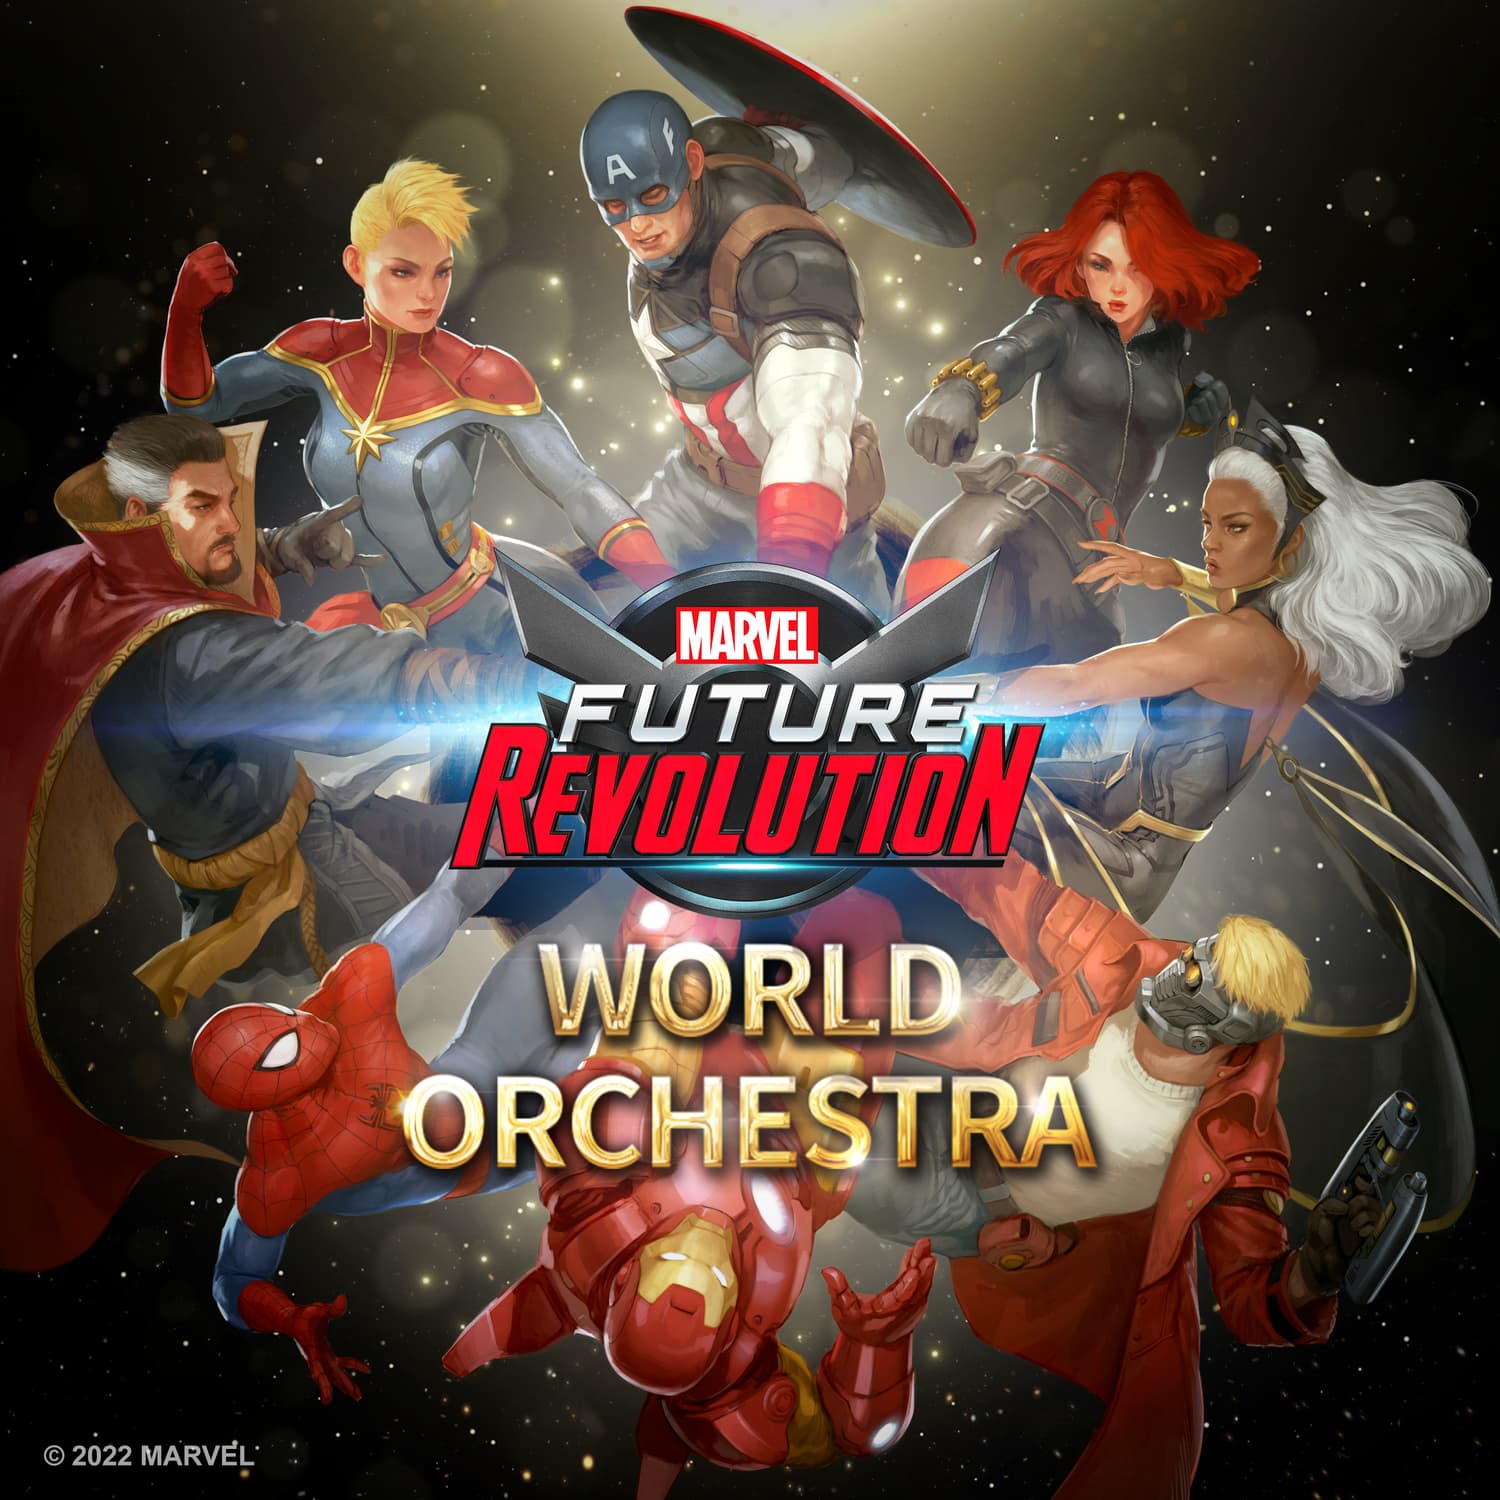 Listen to the Live Performance of the MARVEL Future Revolution: World Orchestra Soundtrack